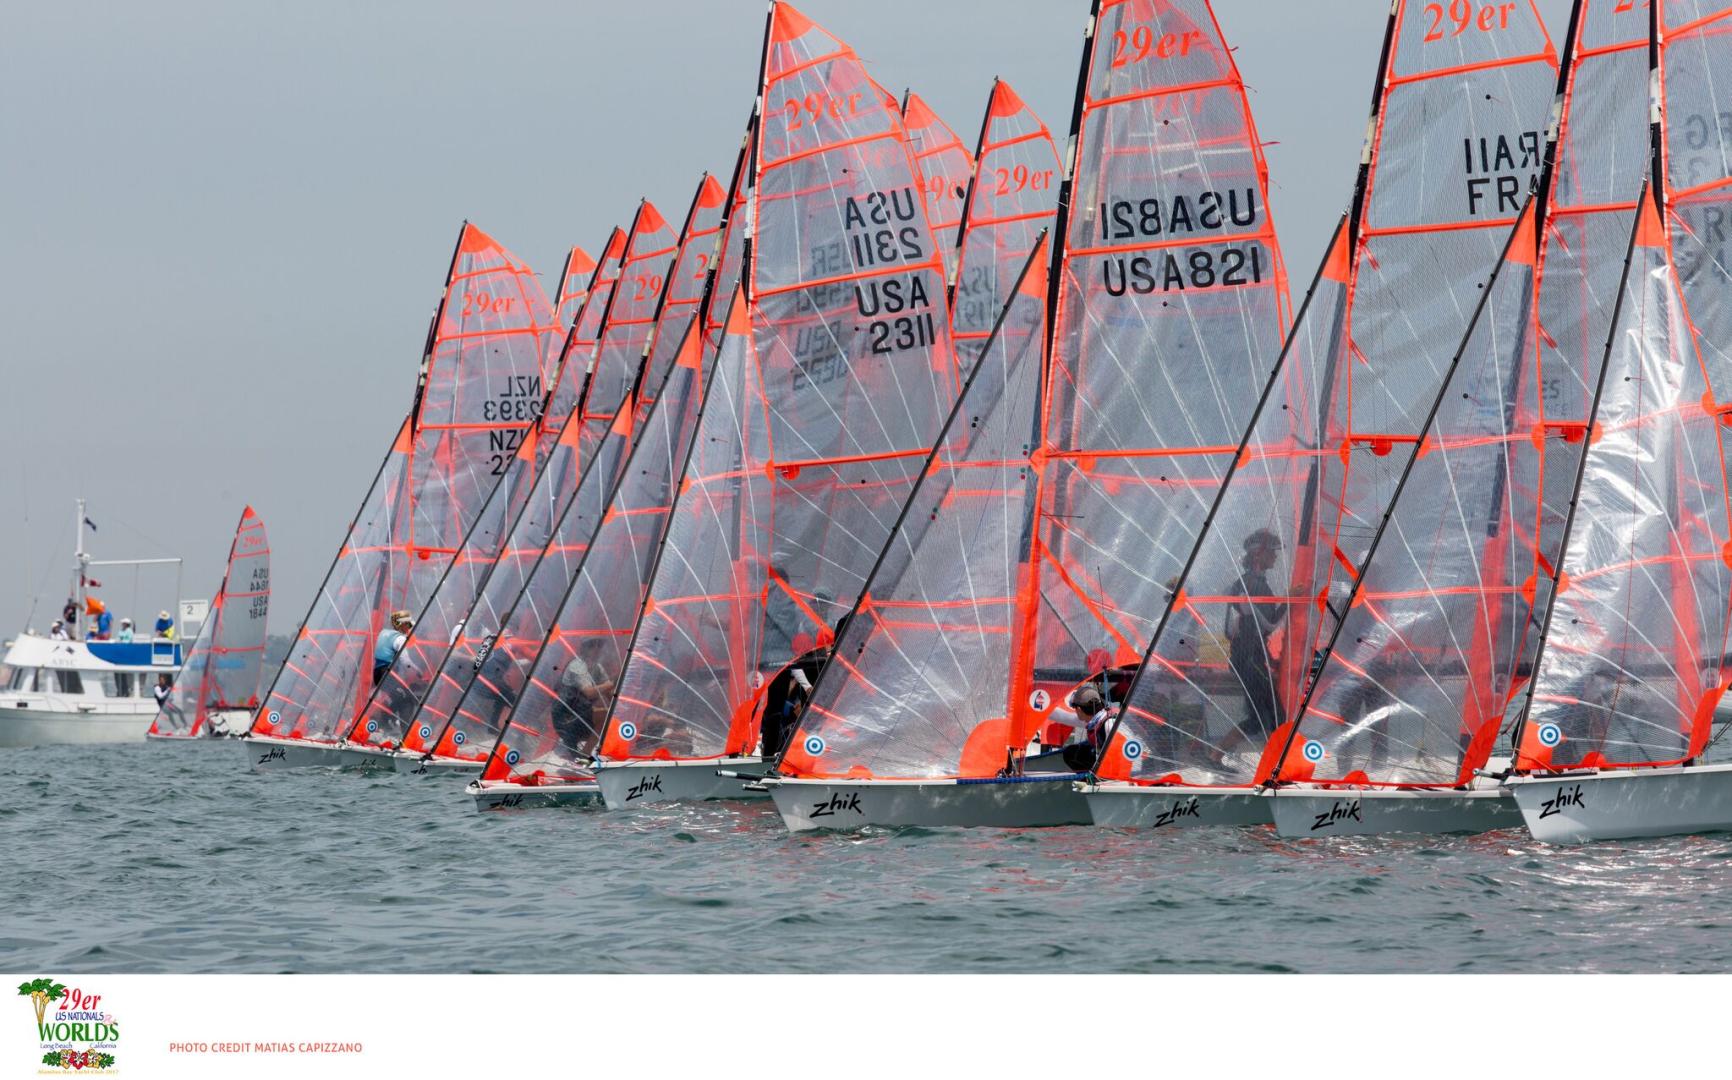 Qualifying complete at Zhik 29ers Worlds